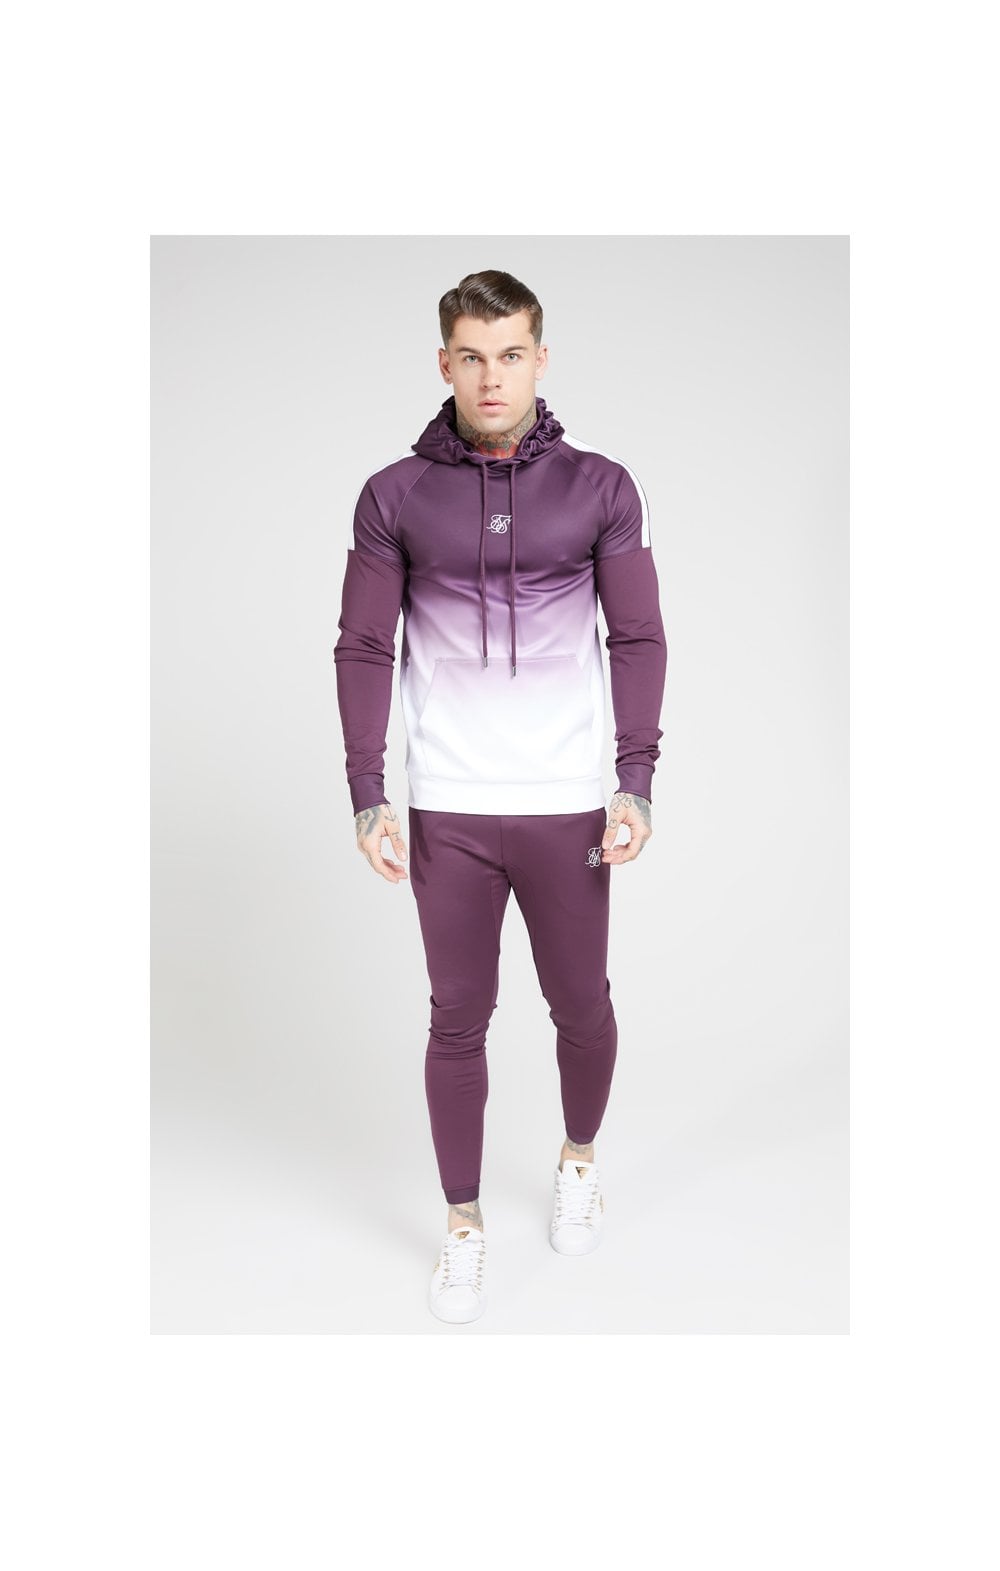 Load image into Gallery viewer, SikSilk Vapour Hybrid Sleeve Tape Hoodie - Rich Burgundy Fade (5)